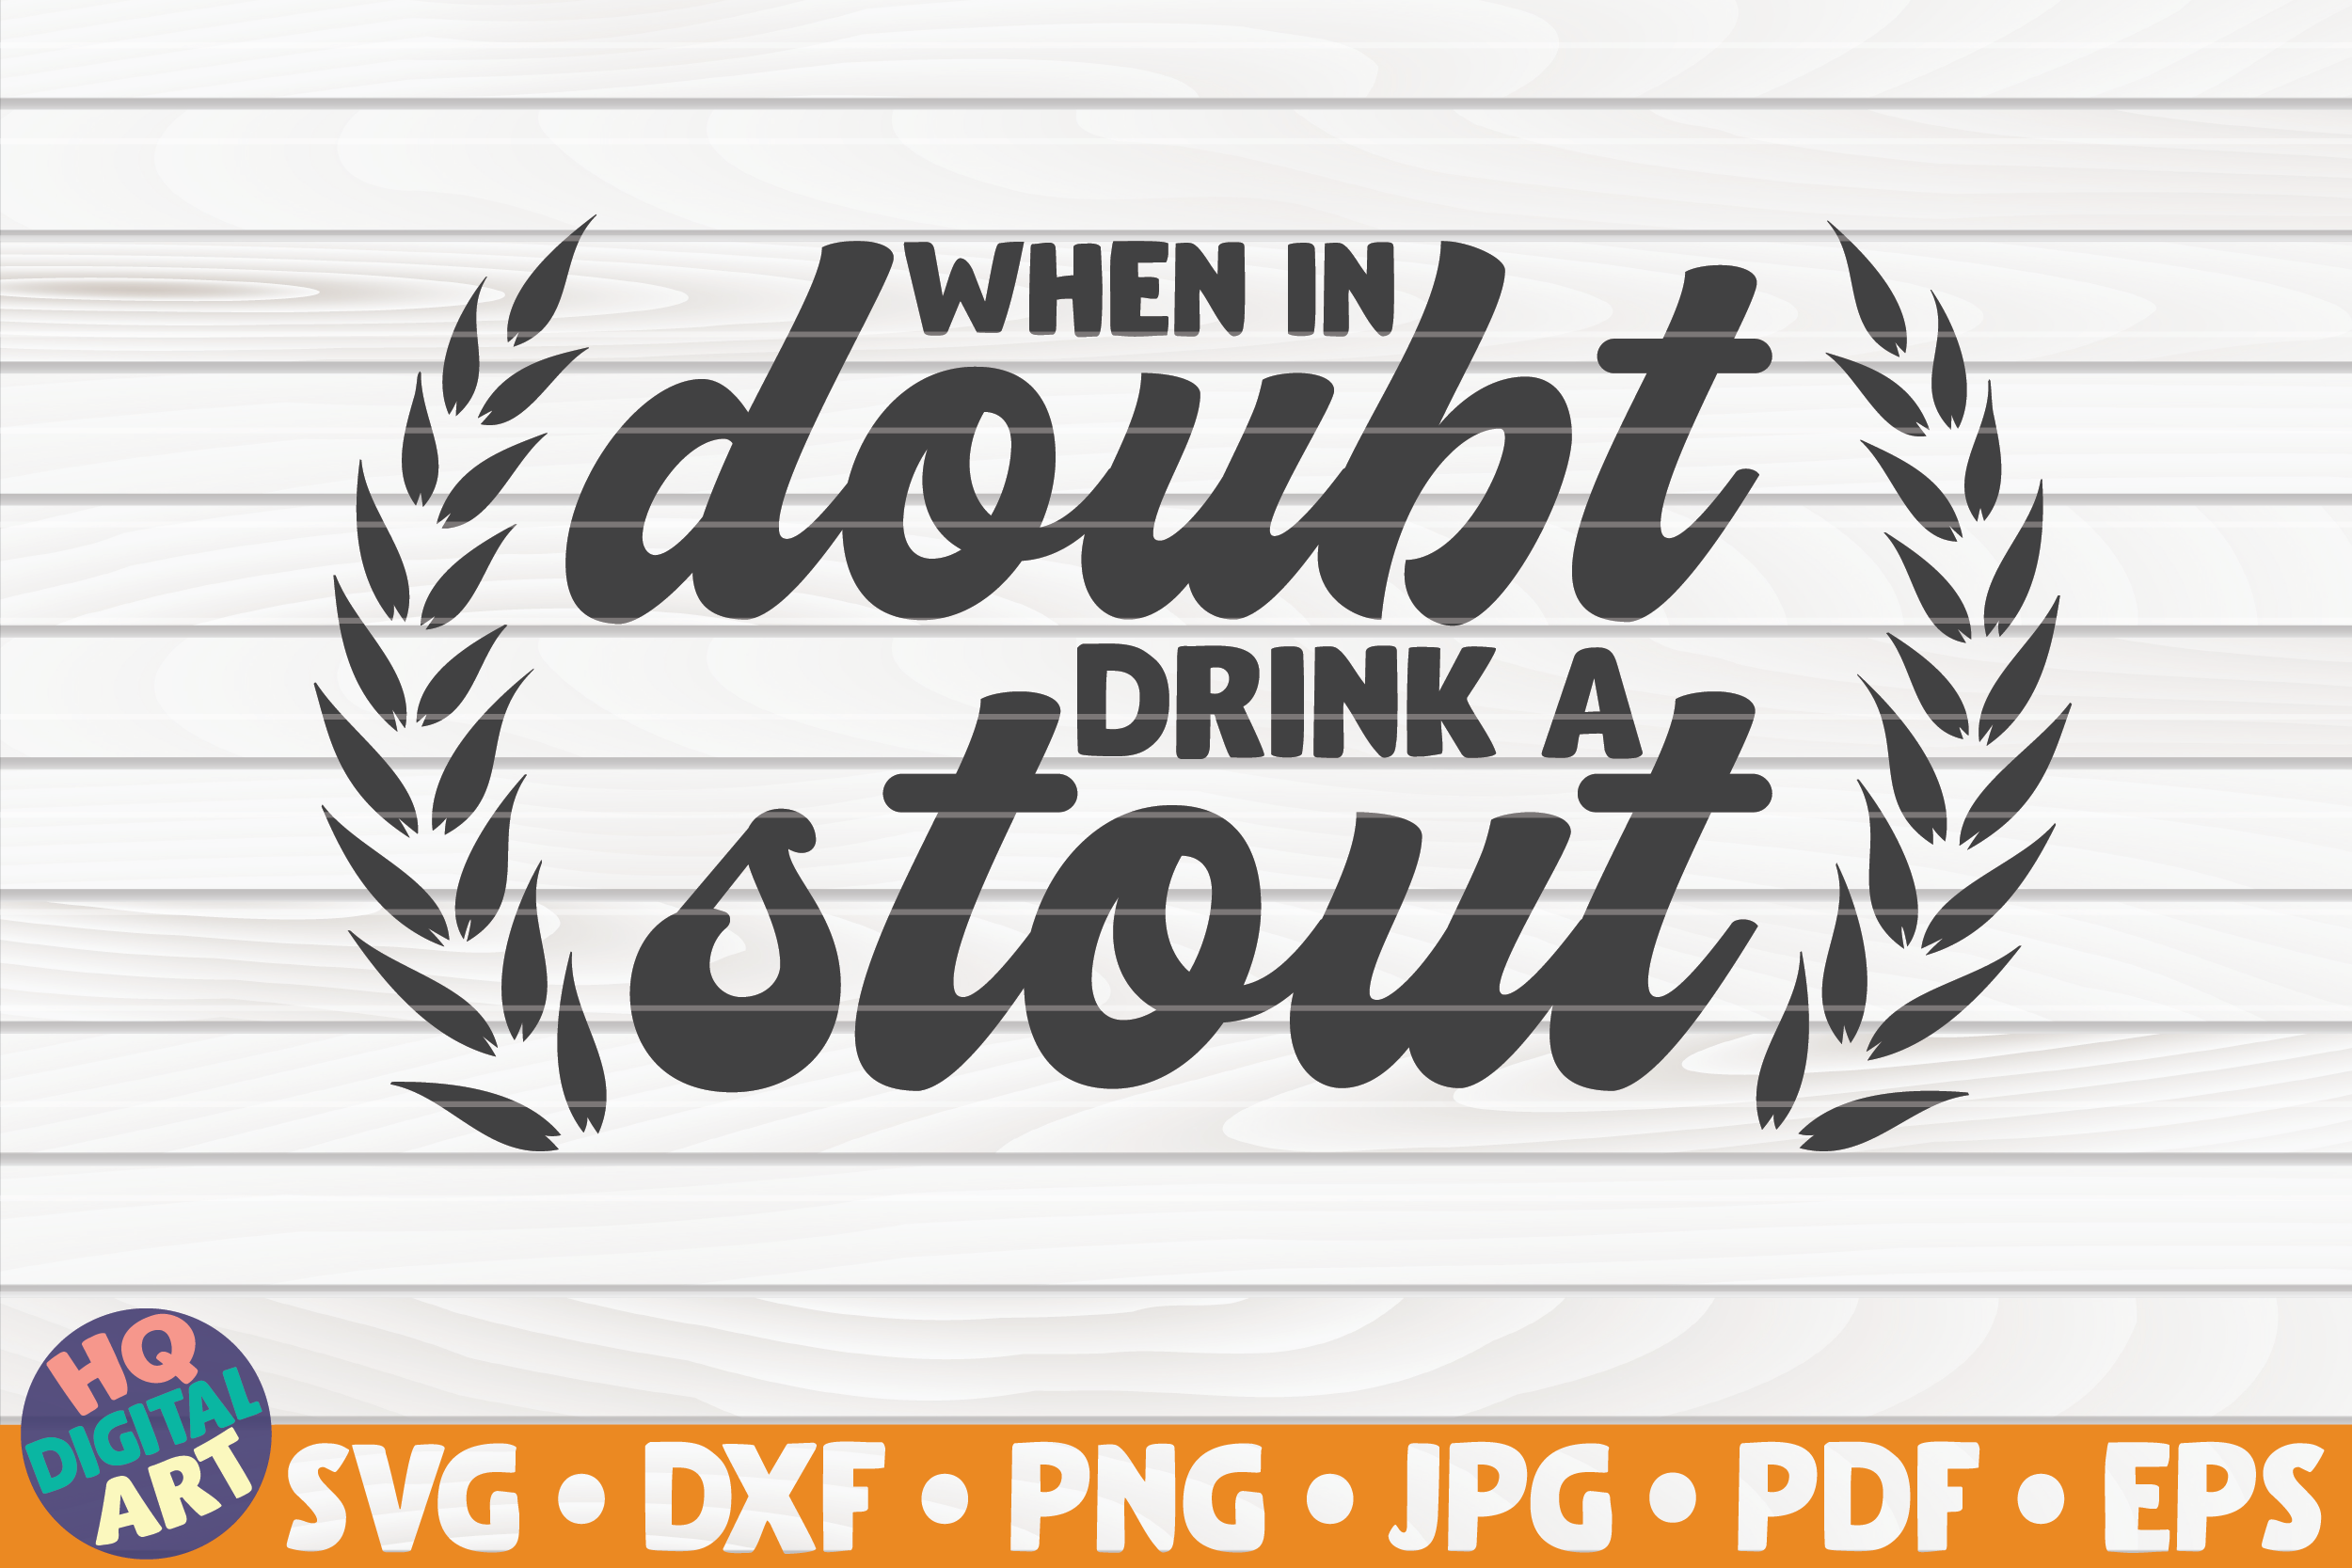 When In Doubt Drink A Stout Svg Beer Quote By Hqdigitalart Thehungryjpeg Com